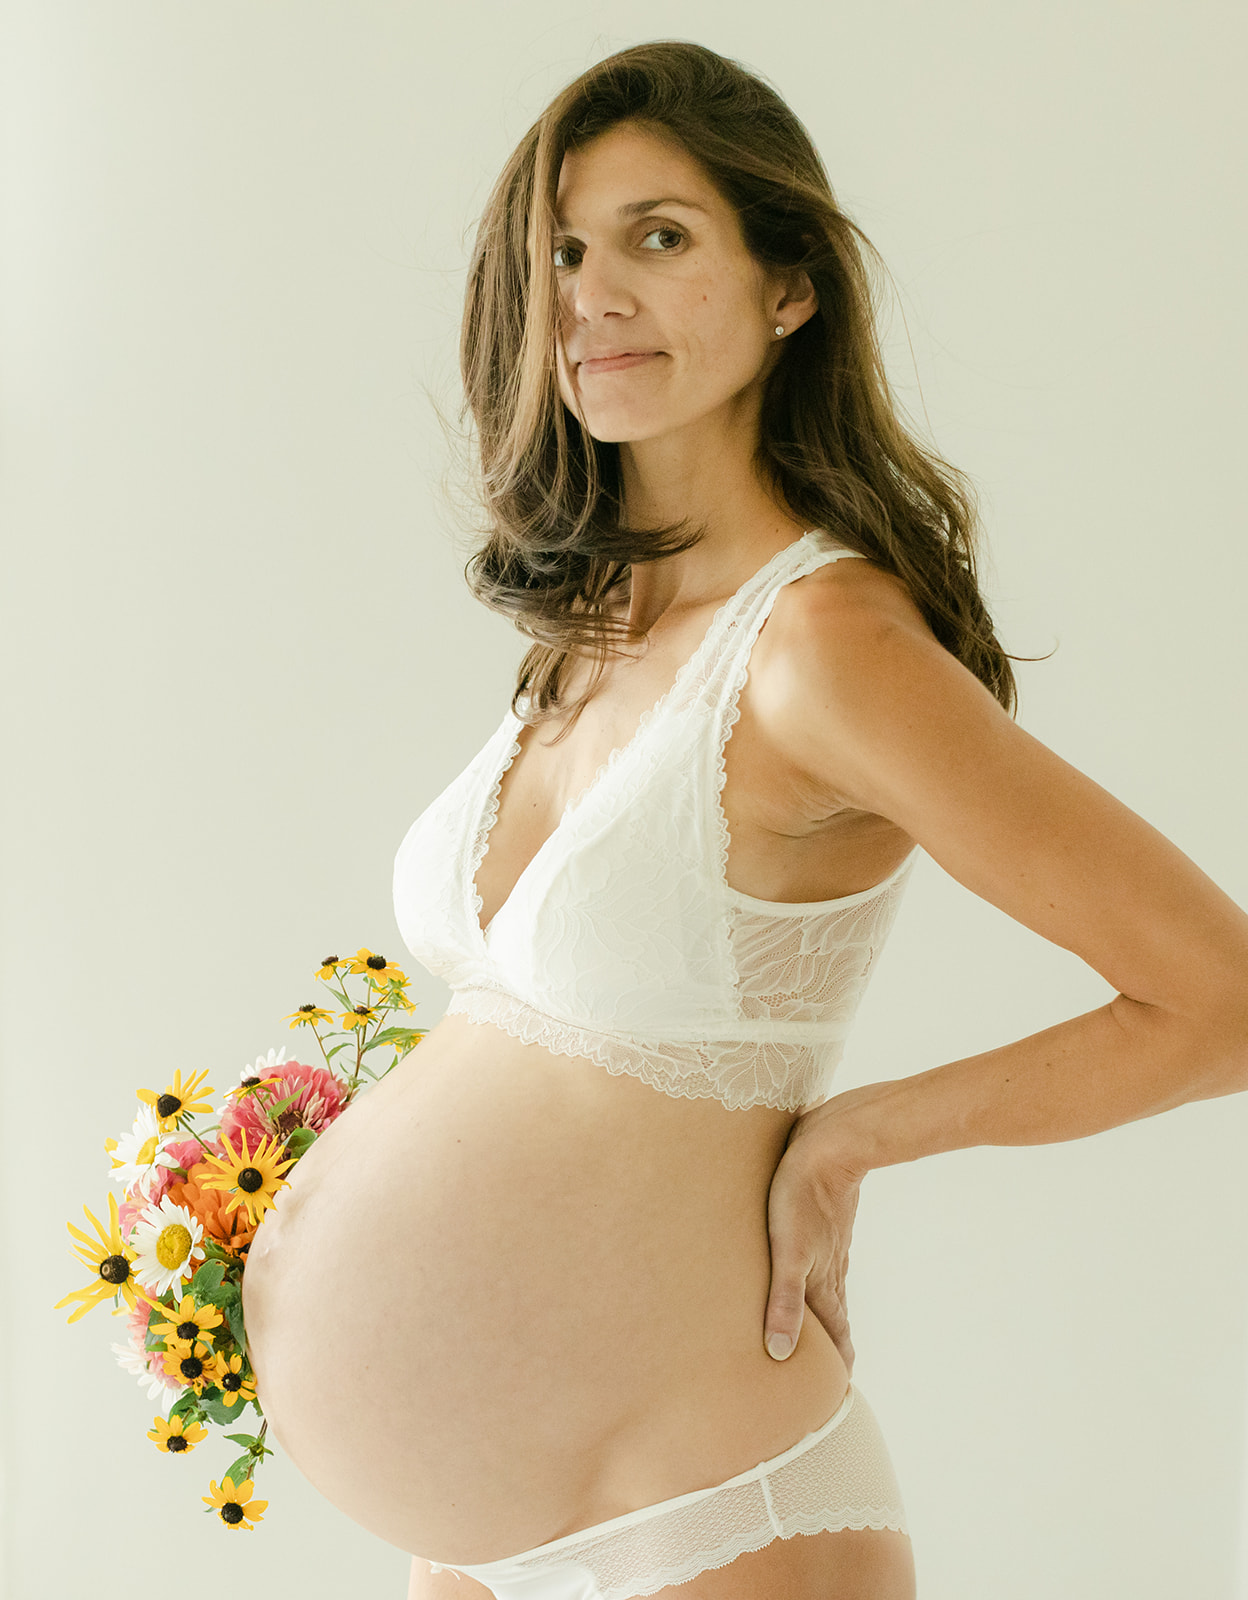 body empowerment and maternity session in nashville studio. mama posing with floral bouquet